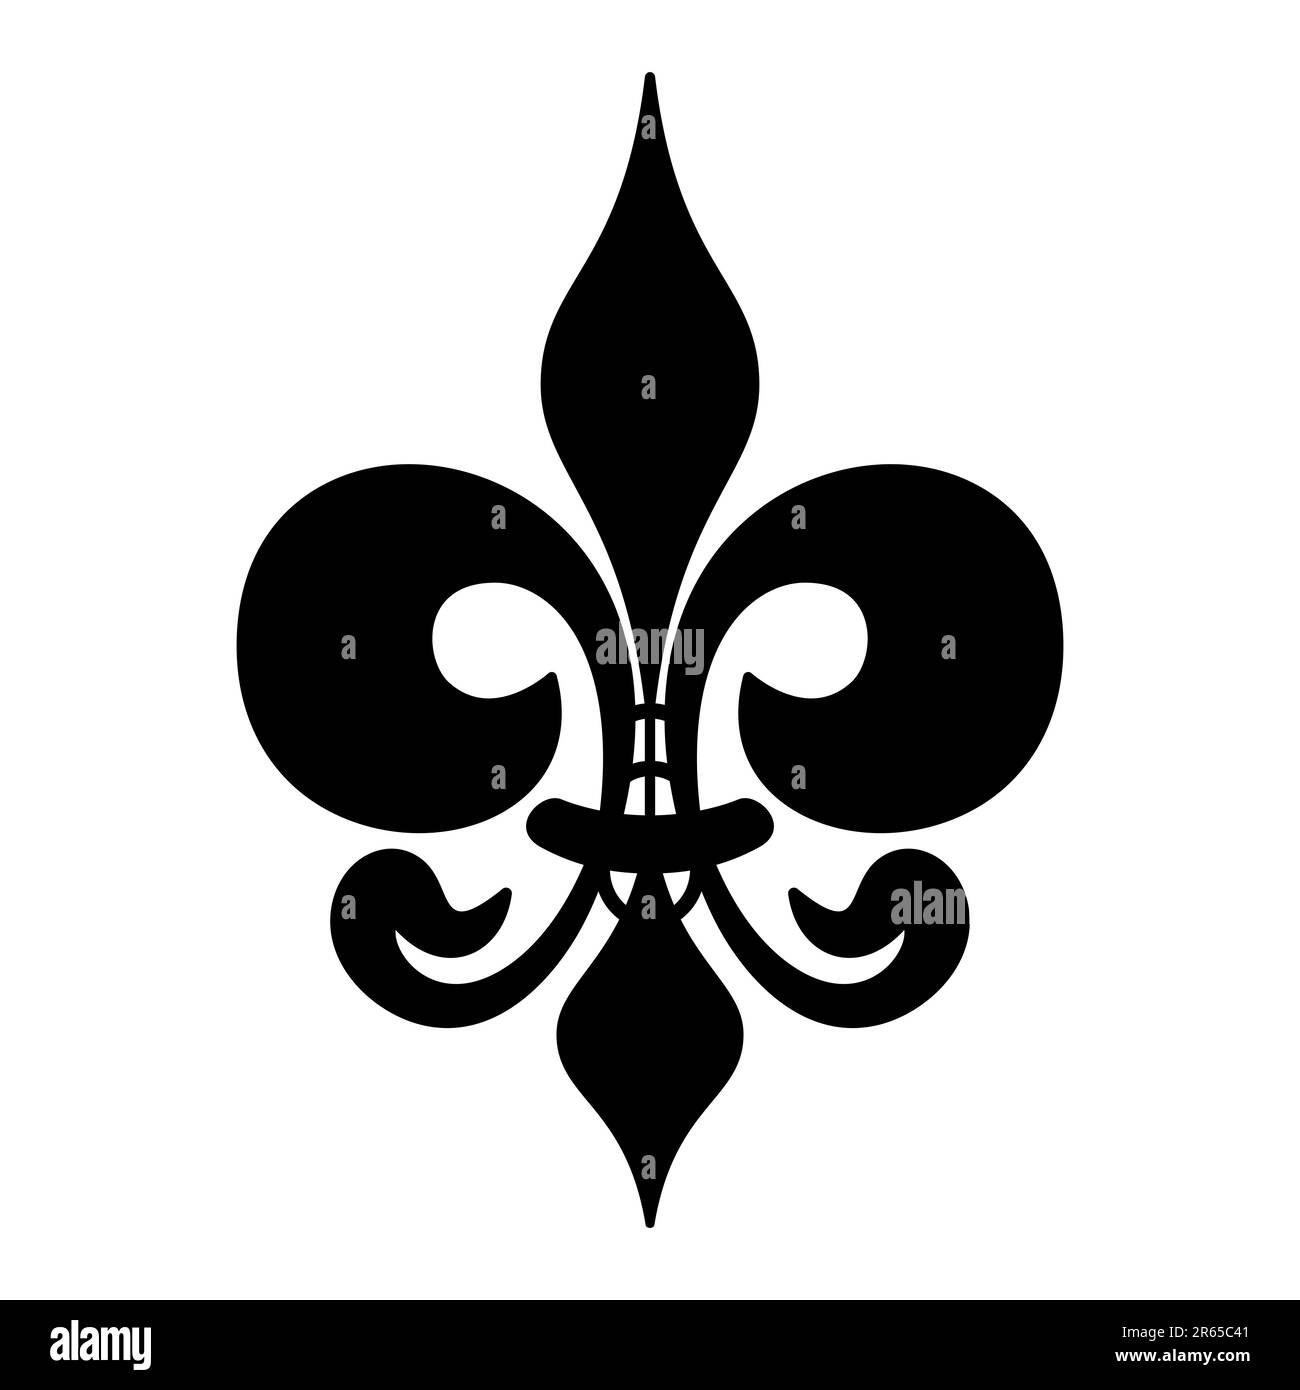 Fleur-de-lis, or fleur-de-lys a symbol of a lily, used since centuries. Used for religious, political, dynastic, artistic, and emblematic purposes. Stock Photo